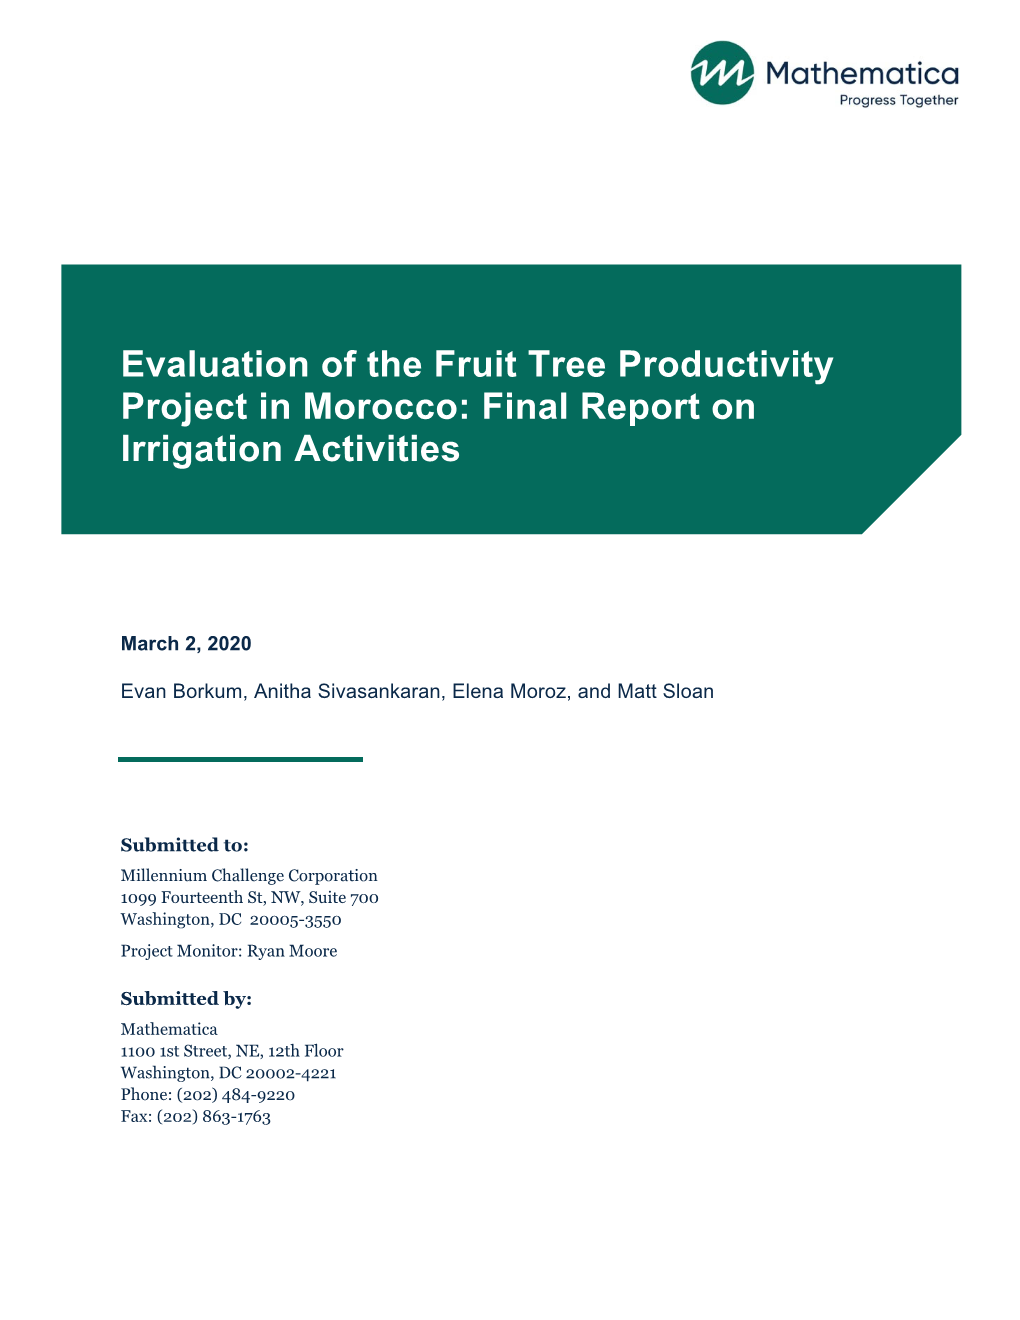 Evaluation of the Fruit Tree Productivity Project in Morocco: Final Report on Irrigation Activities